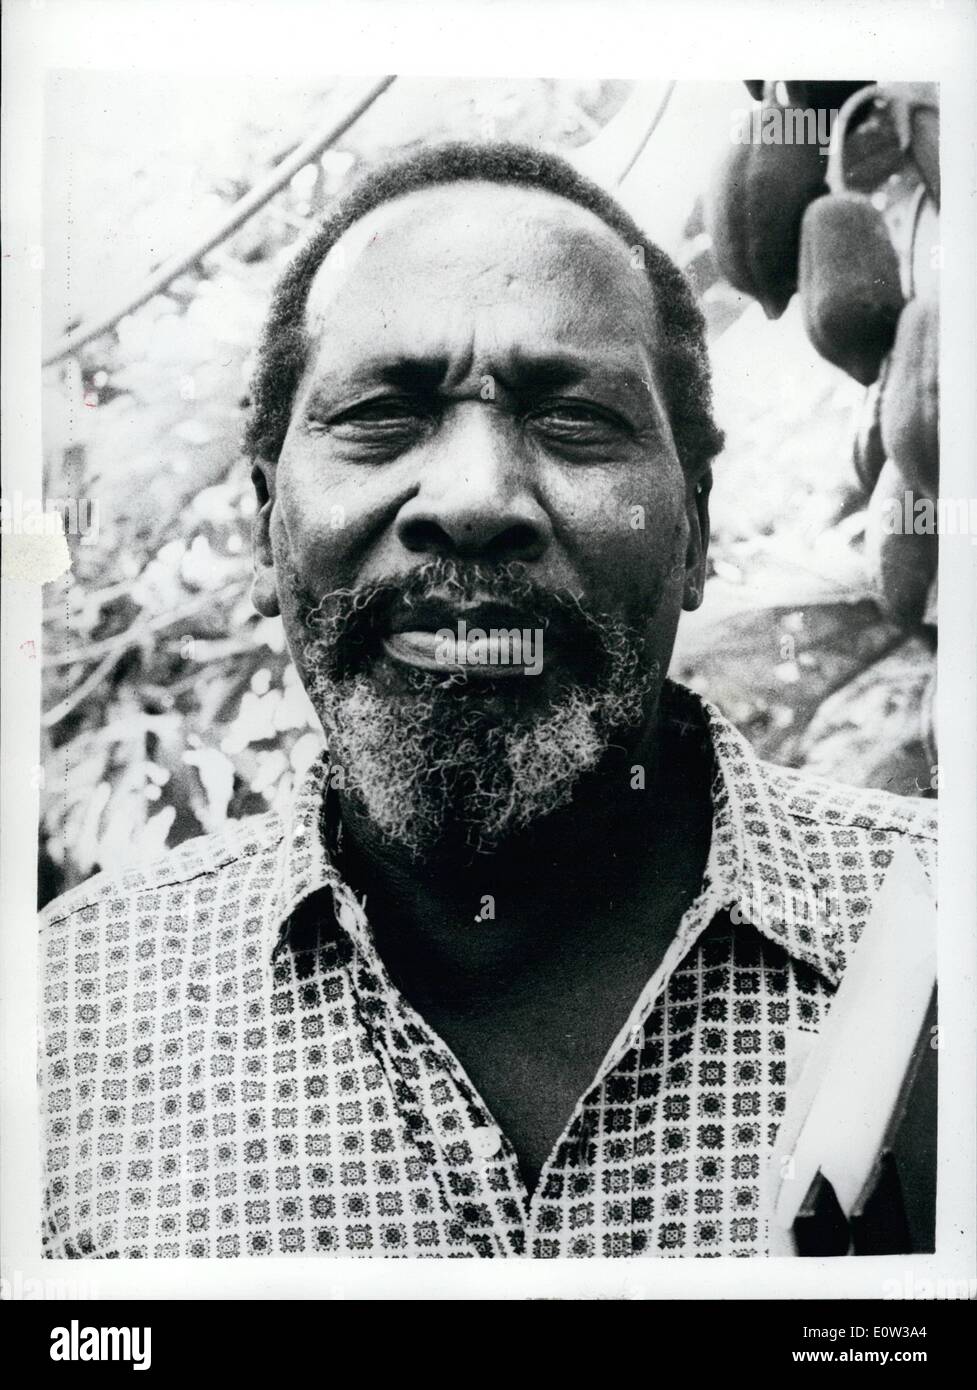 Mar. 03, 1961 - The Voice of Jomo Kenyatta - Applauded at Ali Africa People's Conference in Cario: The Voice of Jomo Kenyatta the convicted leader of the Mau Mau terrorists it Kenyn was heard by delegates at the All-African People's Conference in cairo. The Vocie had been tape-recorded and taken to the conference by Mr. Tom Mboya, Secreatary of the Kenyn African National Union. Kenyatta ia living under restortion in a remote Kenya village- and this was the first time his voice had been heard after eight years of imprisonment Stock Photo